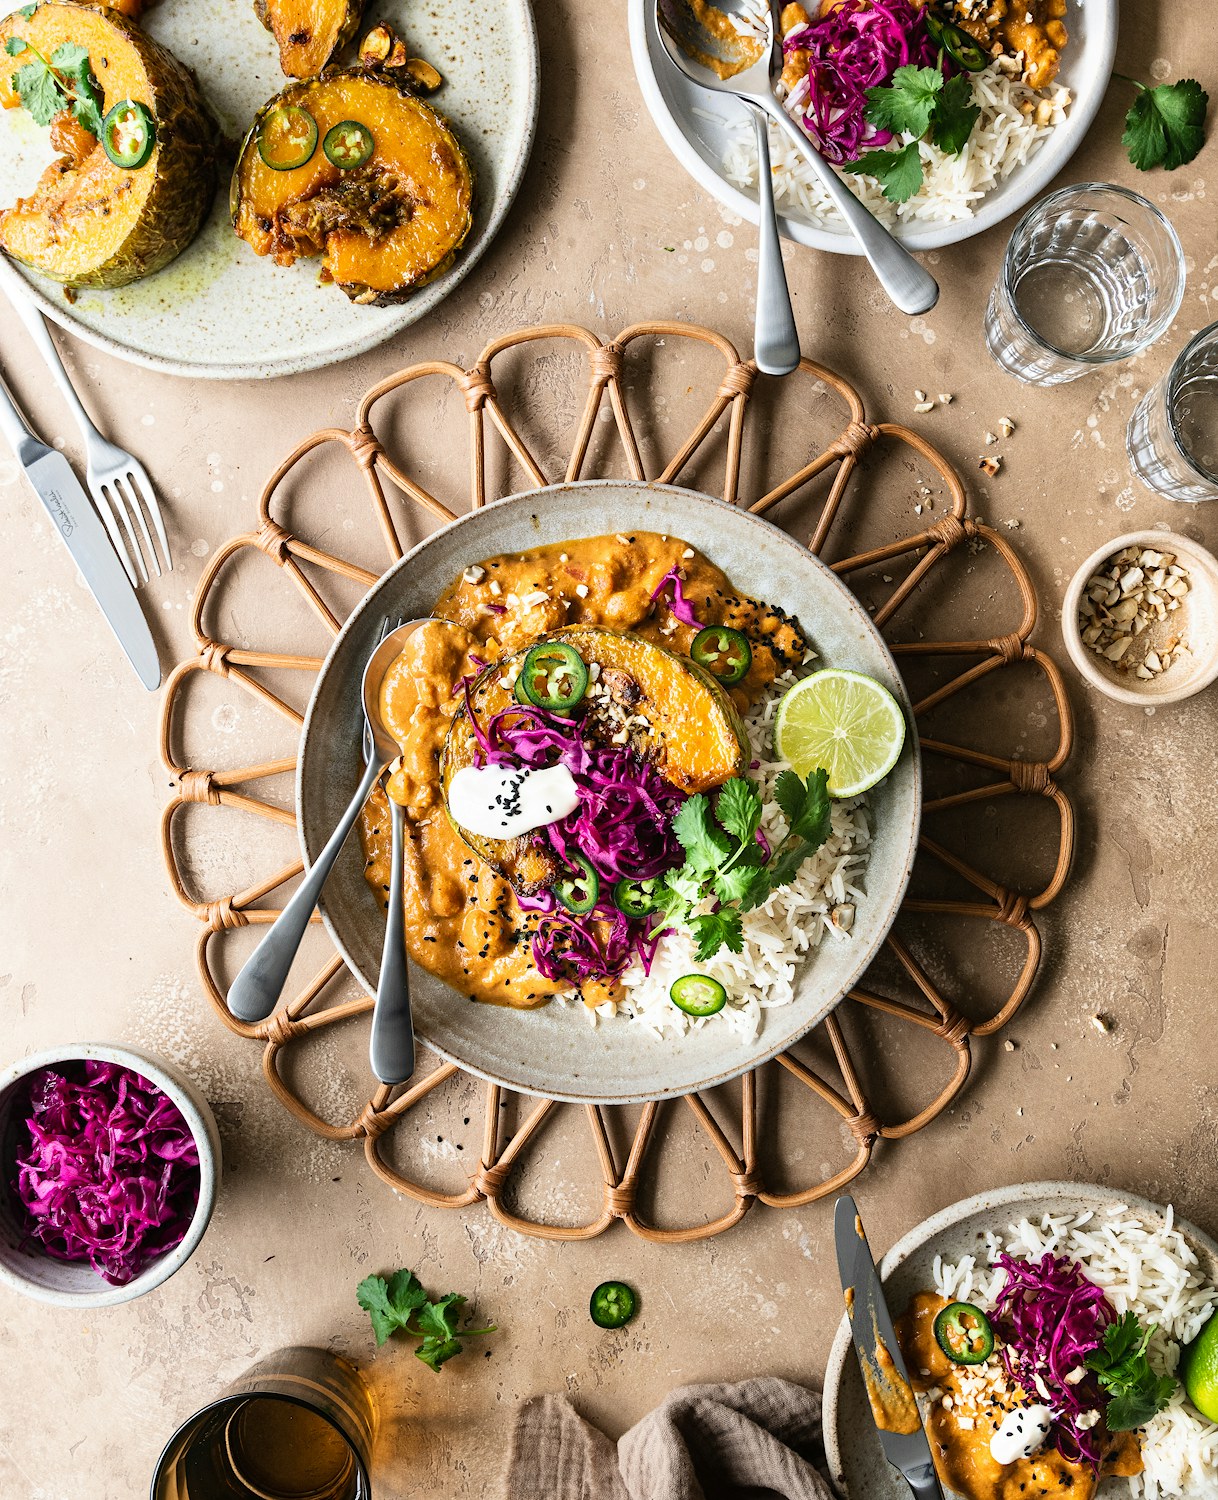 Chickpea Makhani with Spiced Roasted Squash